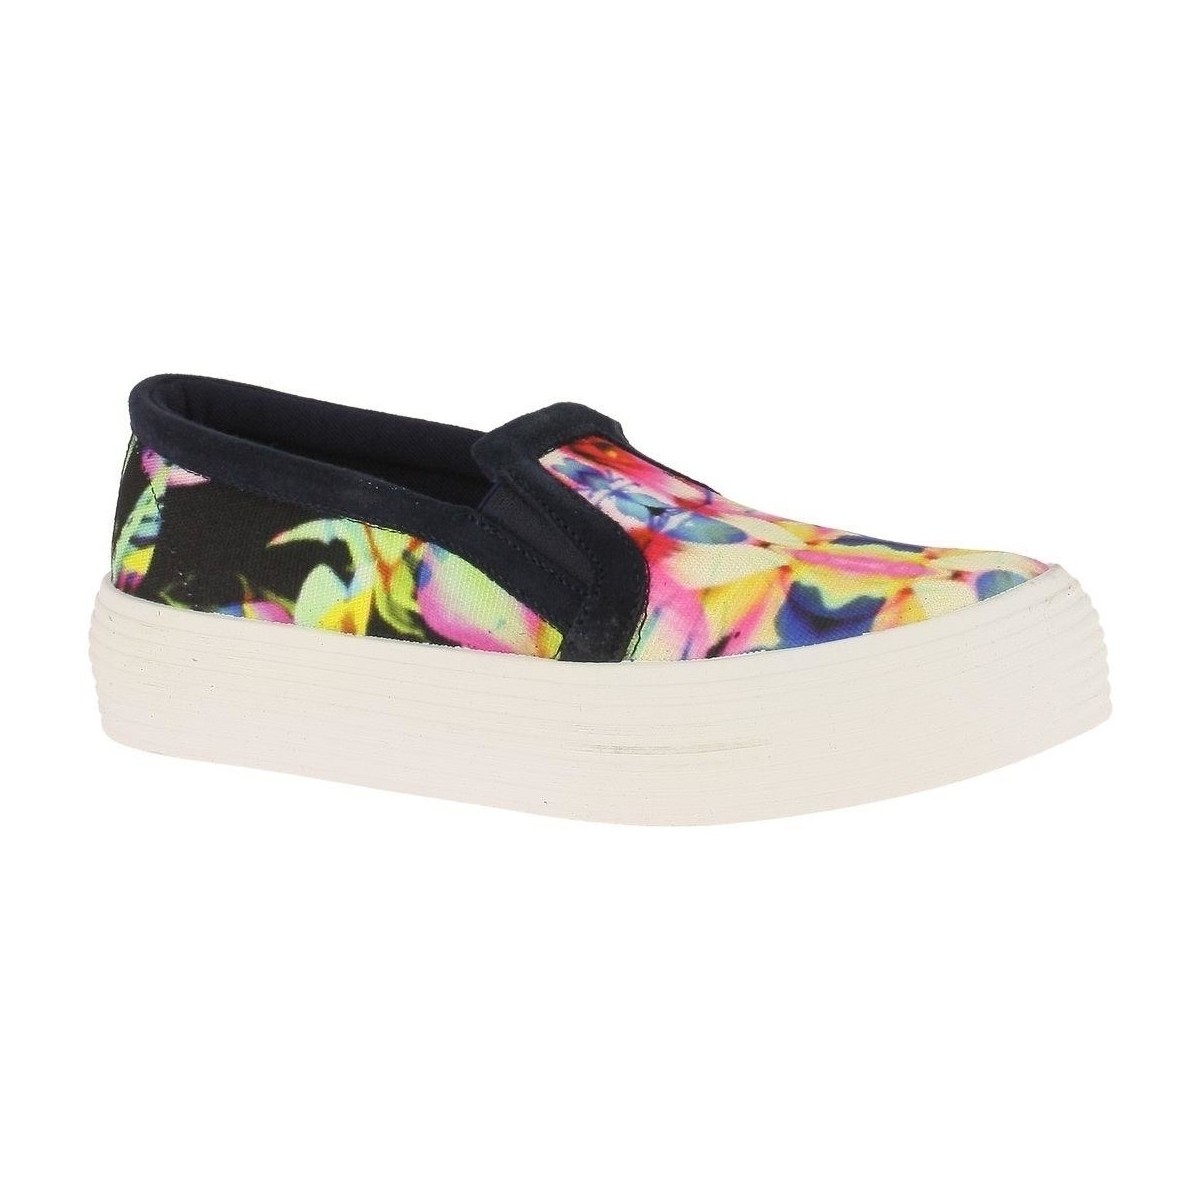 Chaussures Femme Baskets mode Sixty Seven HARA Multicolore